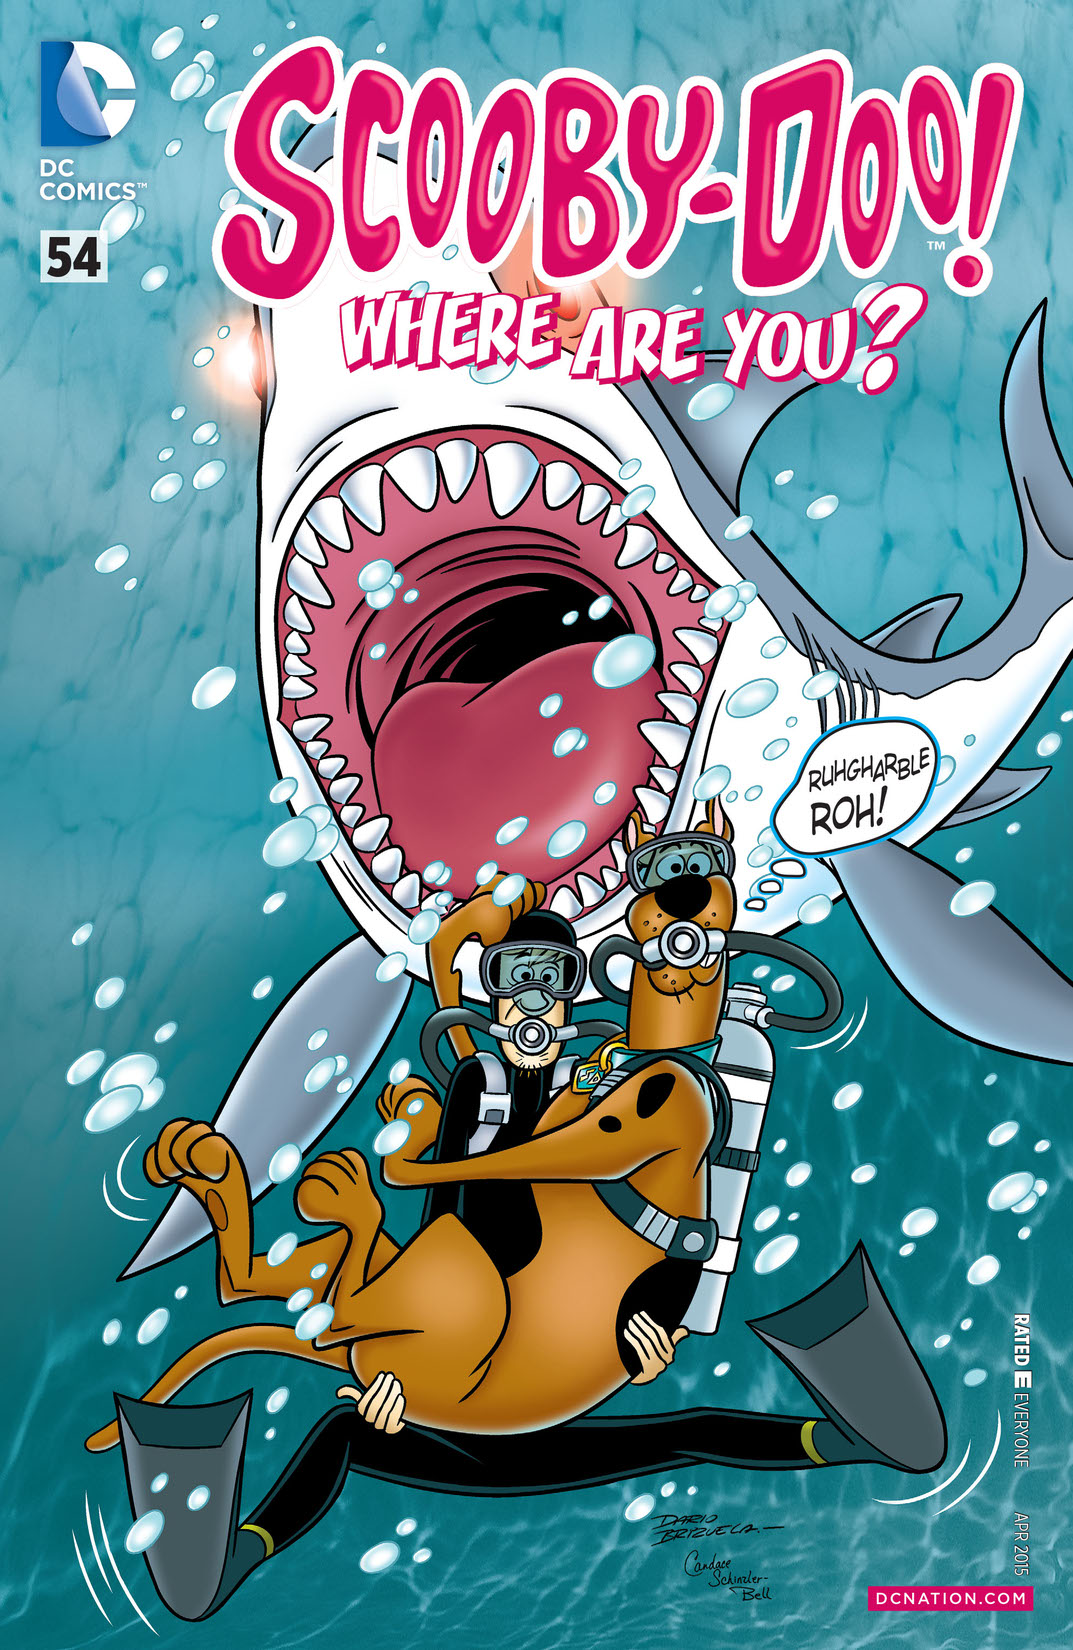 Scooby-Doo, Where Are You? #54 preview images